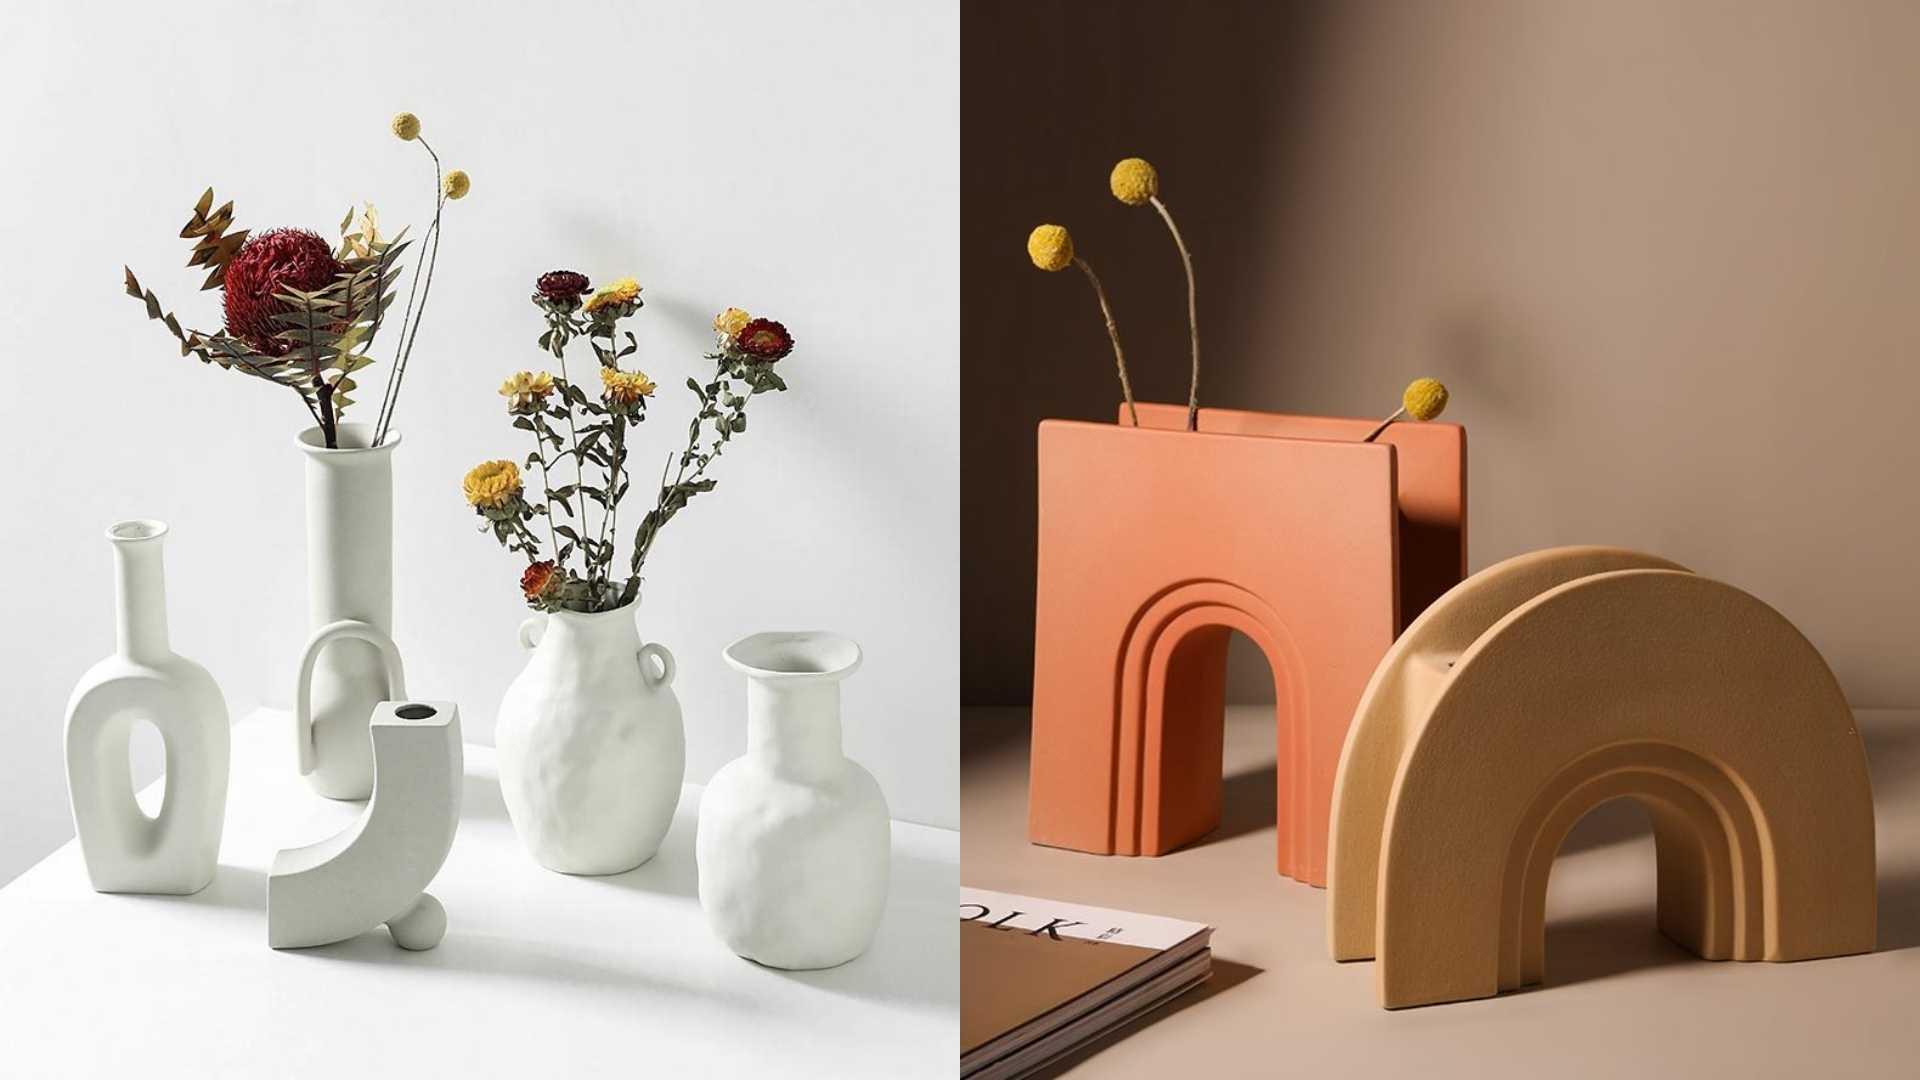 Different shapes of plant vases.